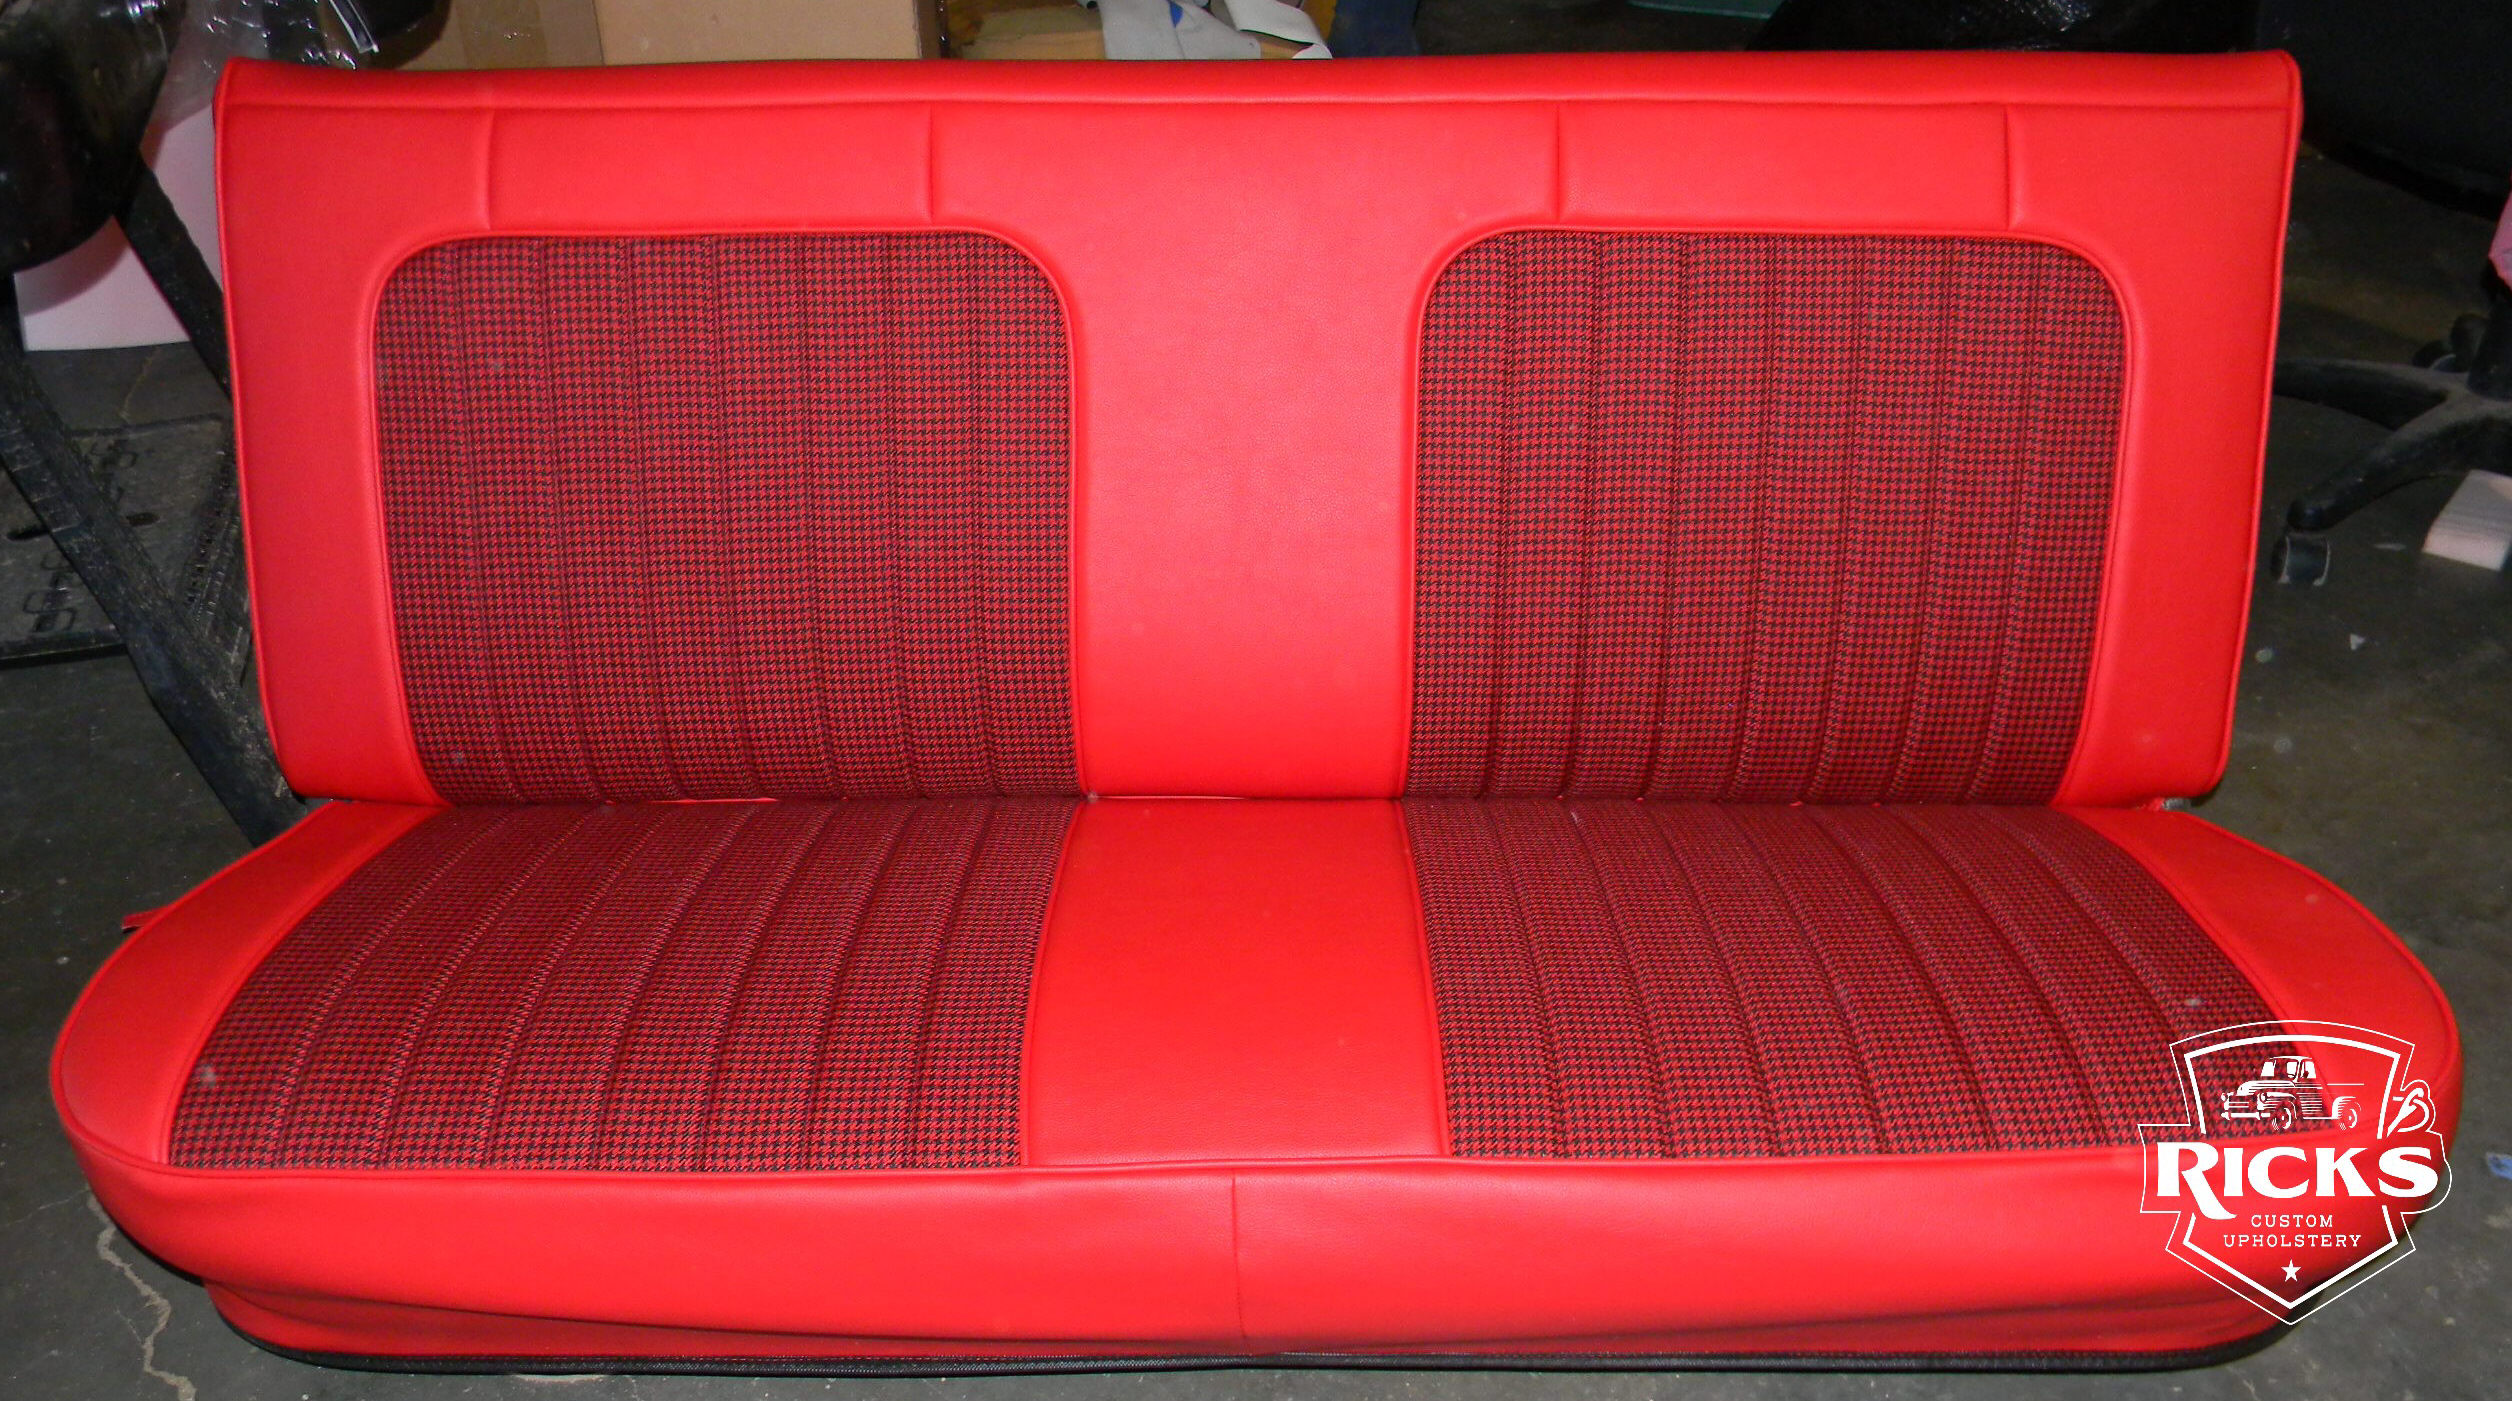 1972 Chevy Truck / Houndstooth / Bench Seat Covers / Rick's Custom